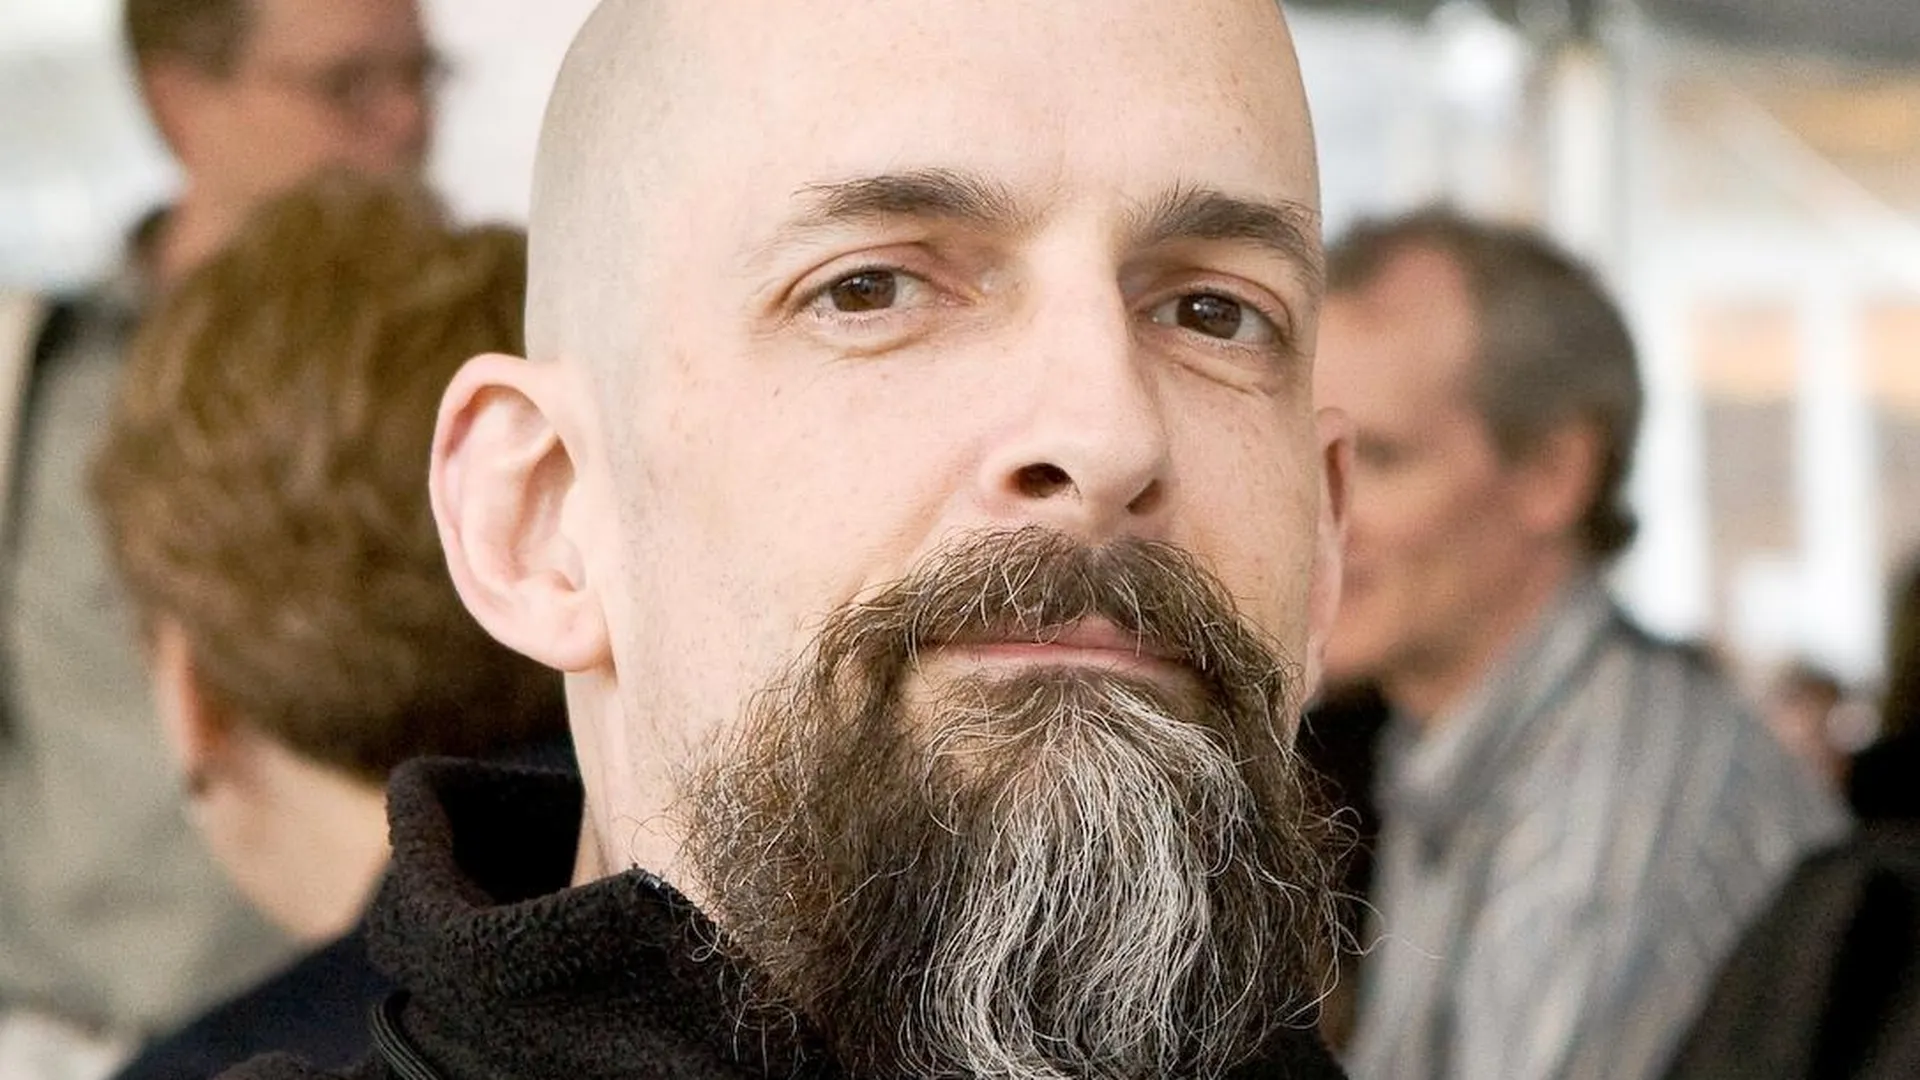 Bob Lee; cropped by Beyond My Ken (talk) 20:21, 14 June 2010 (UTC). originally posted to Flickr as Neal Stephenson, CC BY 2.0